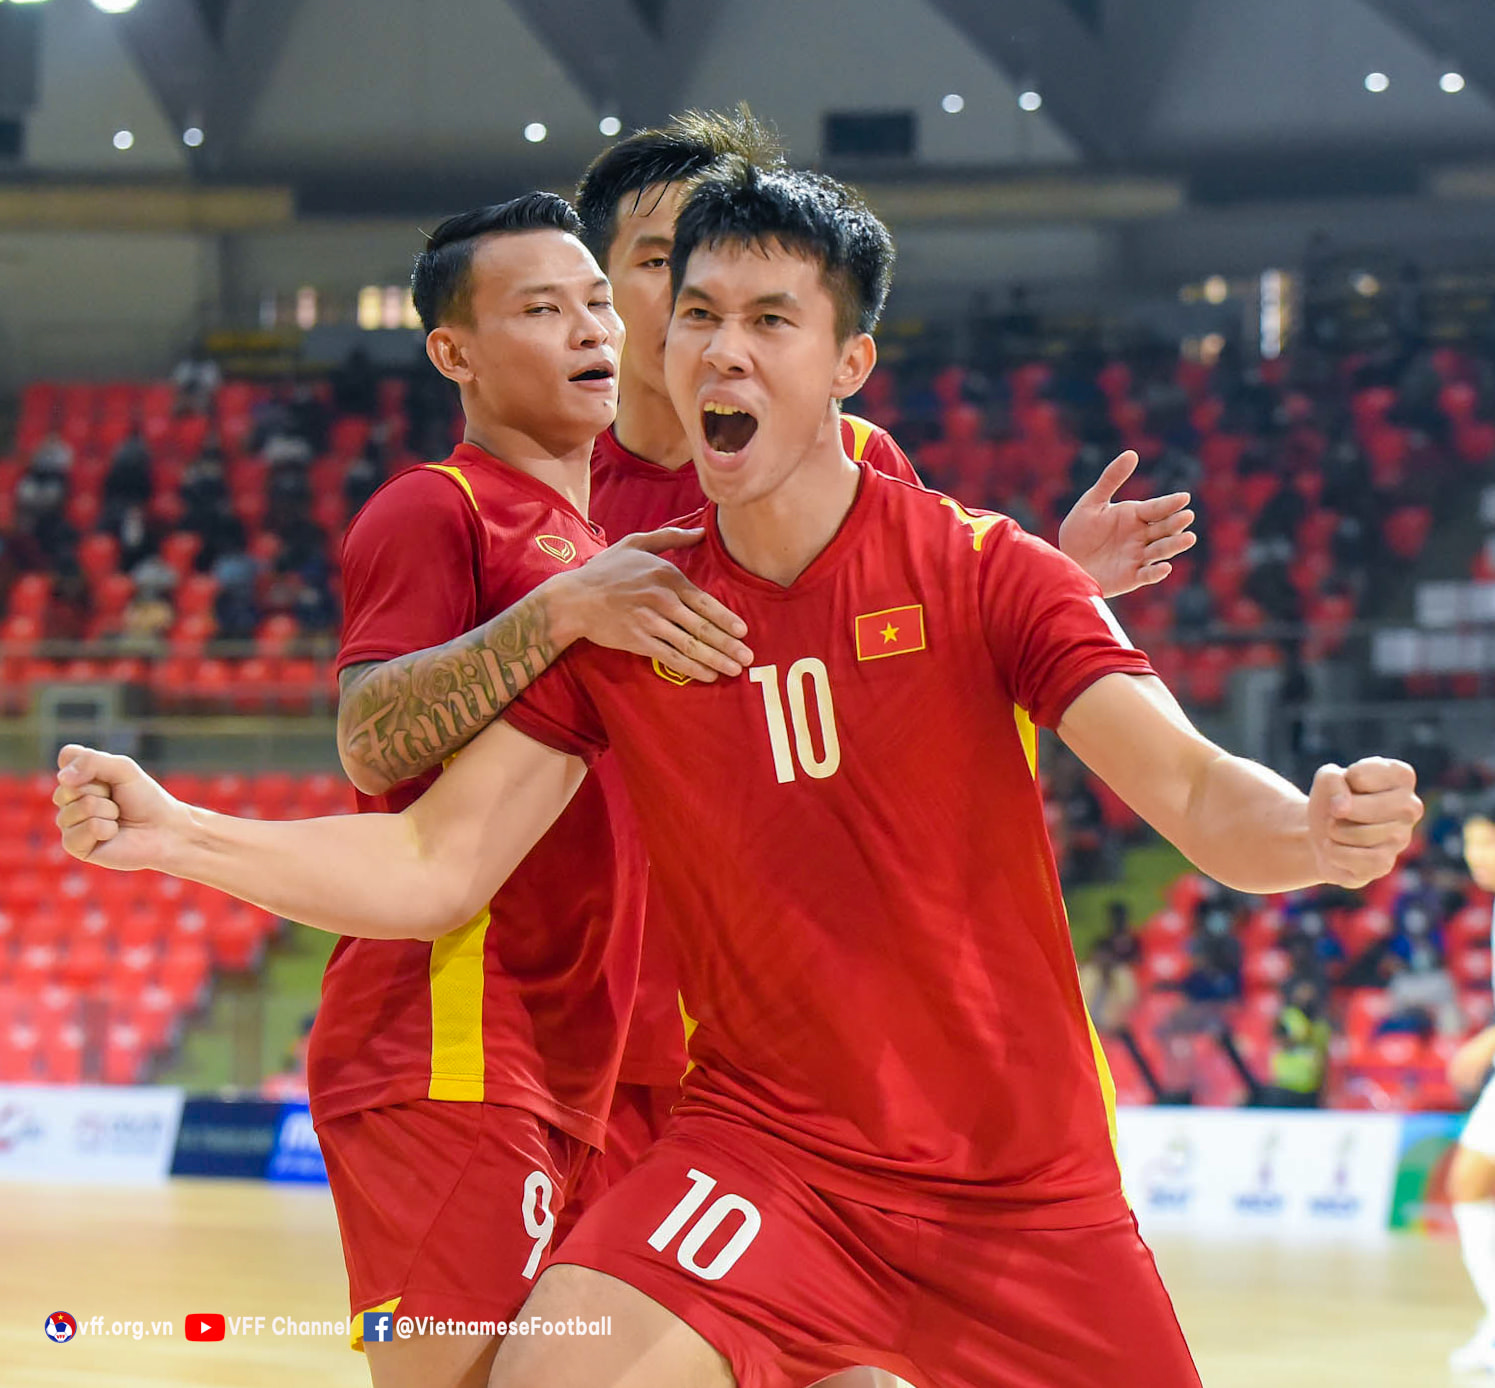 Vietnam’s Thinh Phat celebrates a goal in their third-place playoff match against Myanmar at the AFF Futsal Championship in Thailand, April 10, 2022. Photo: Vietnam Football Federation